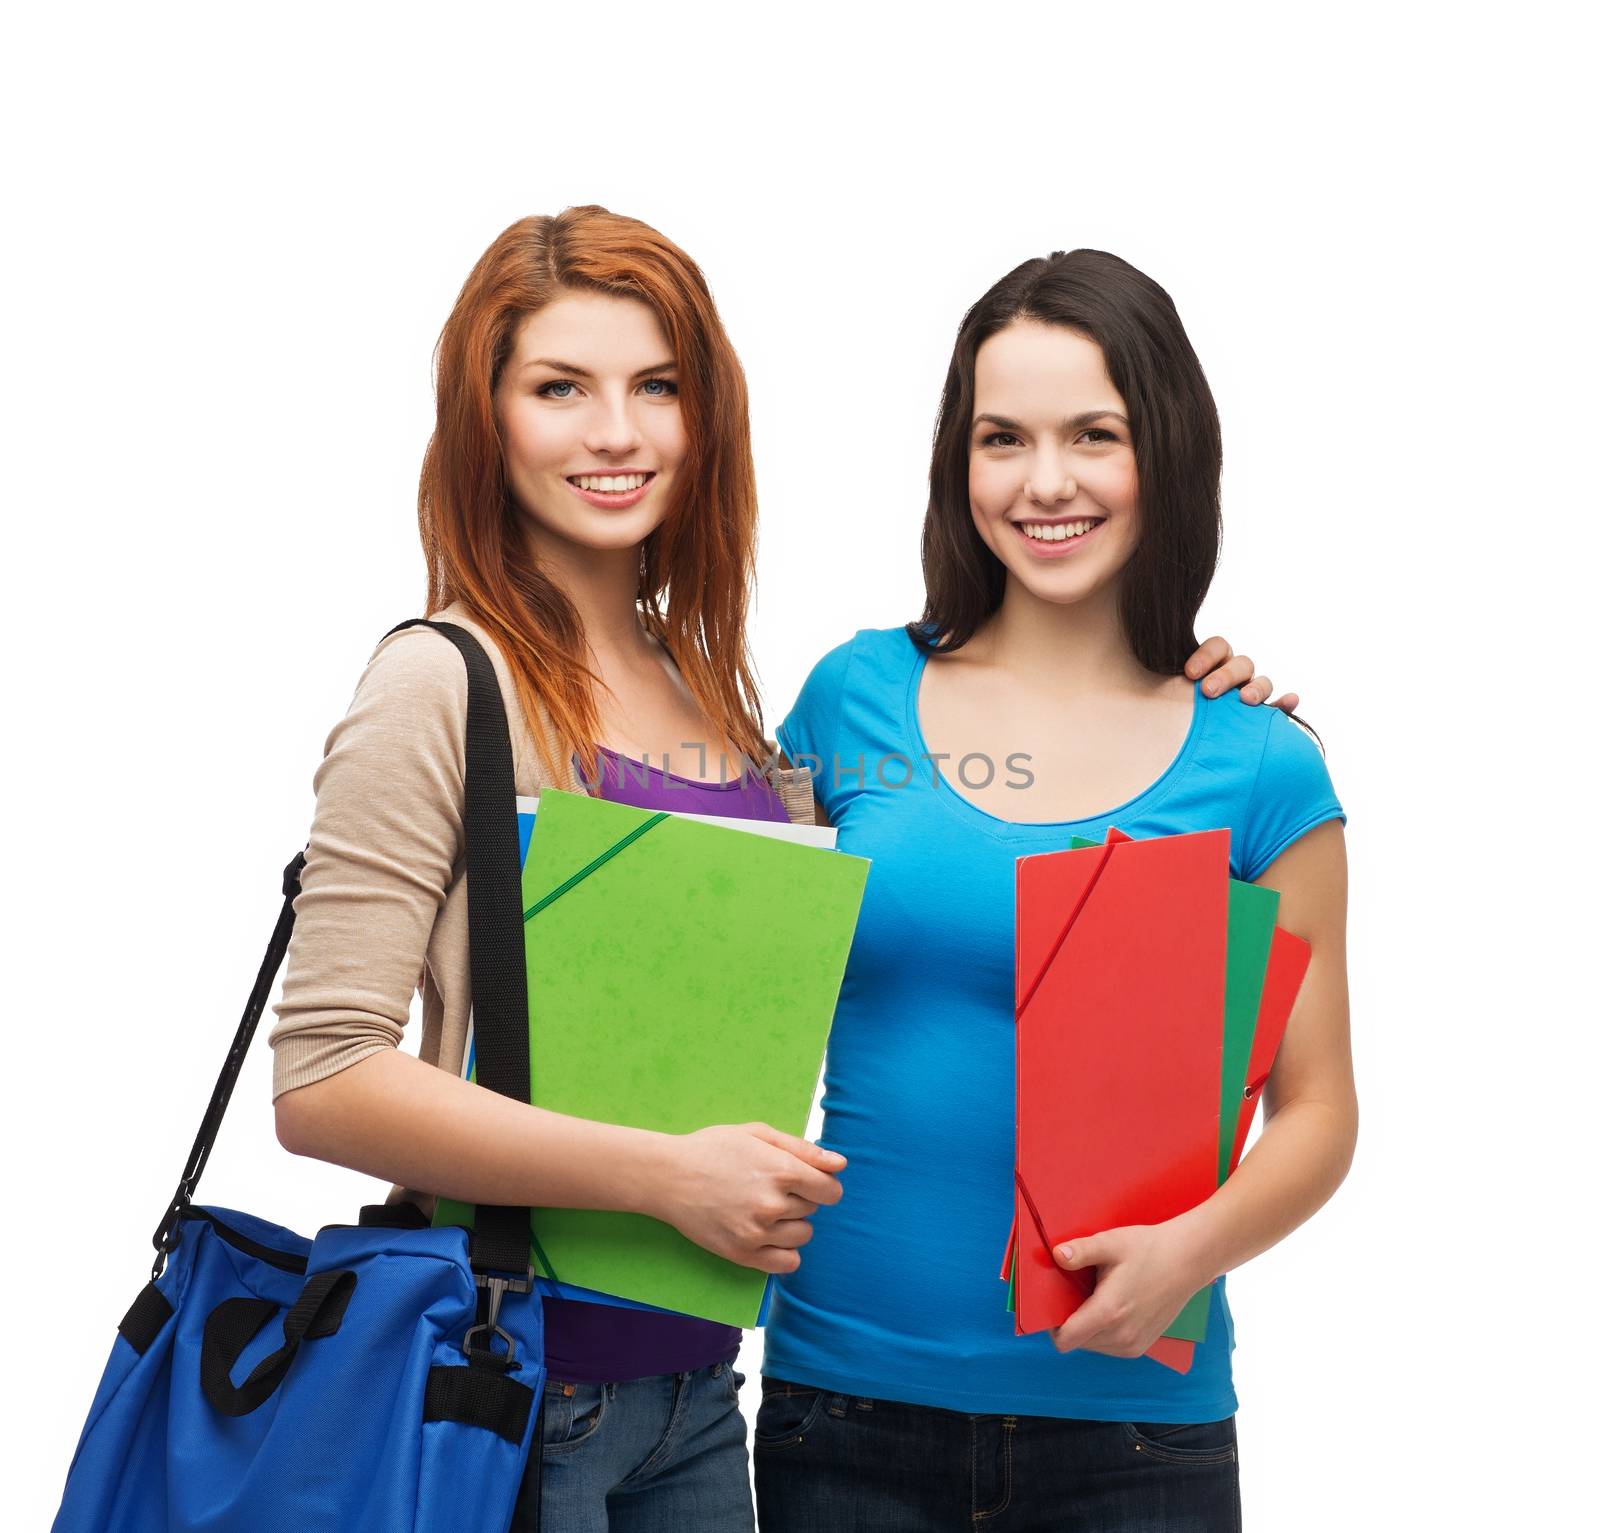 two smiling students with bag and folders by dolgachov